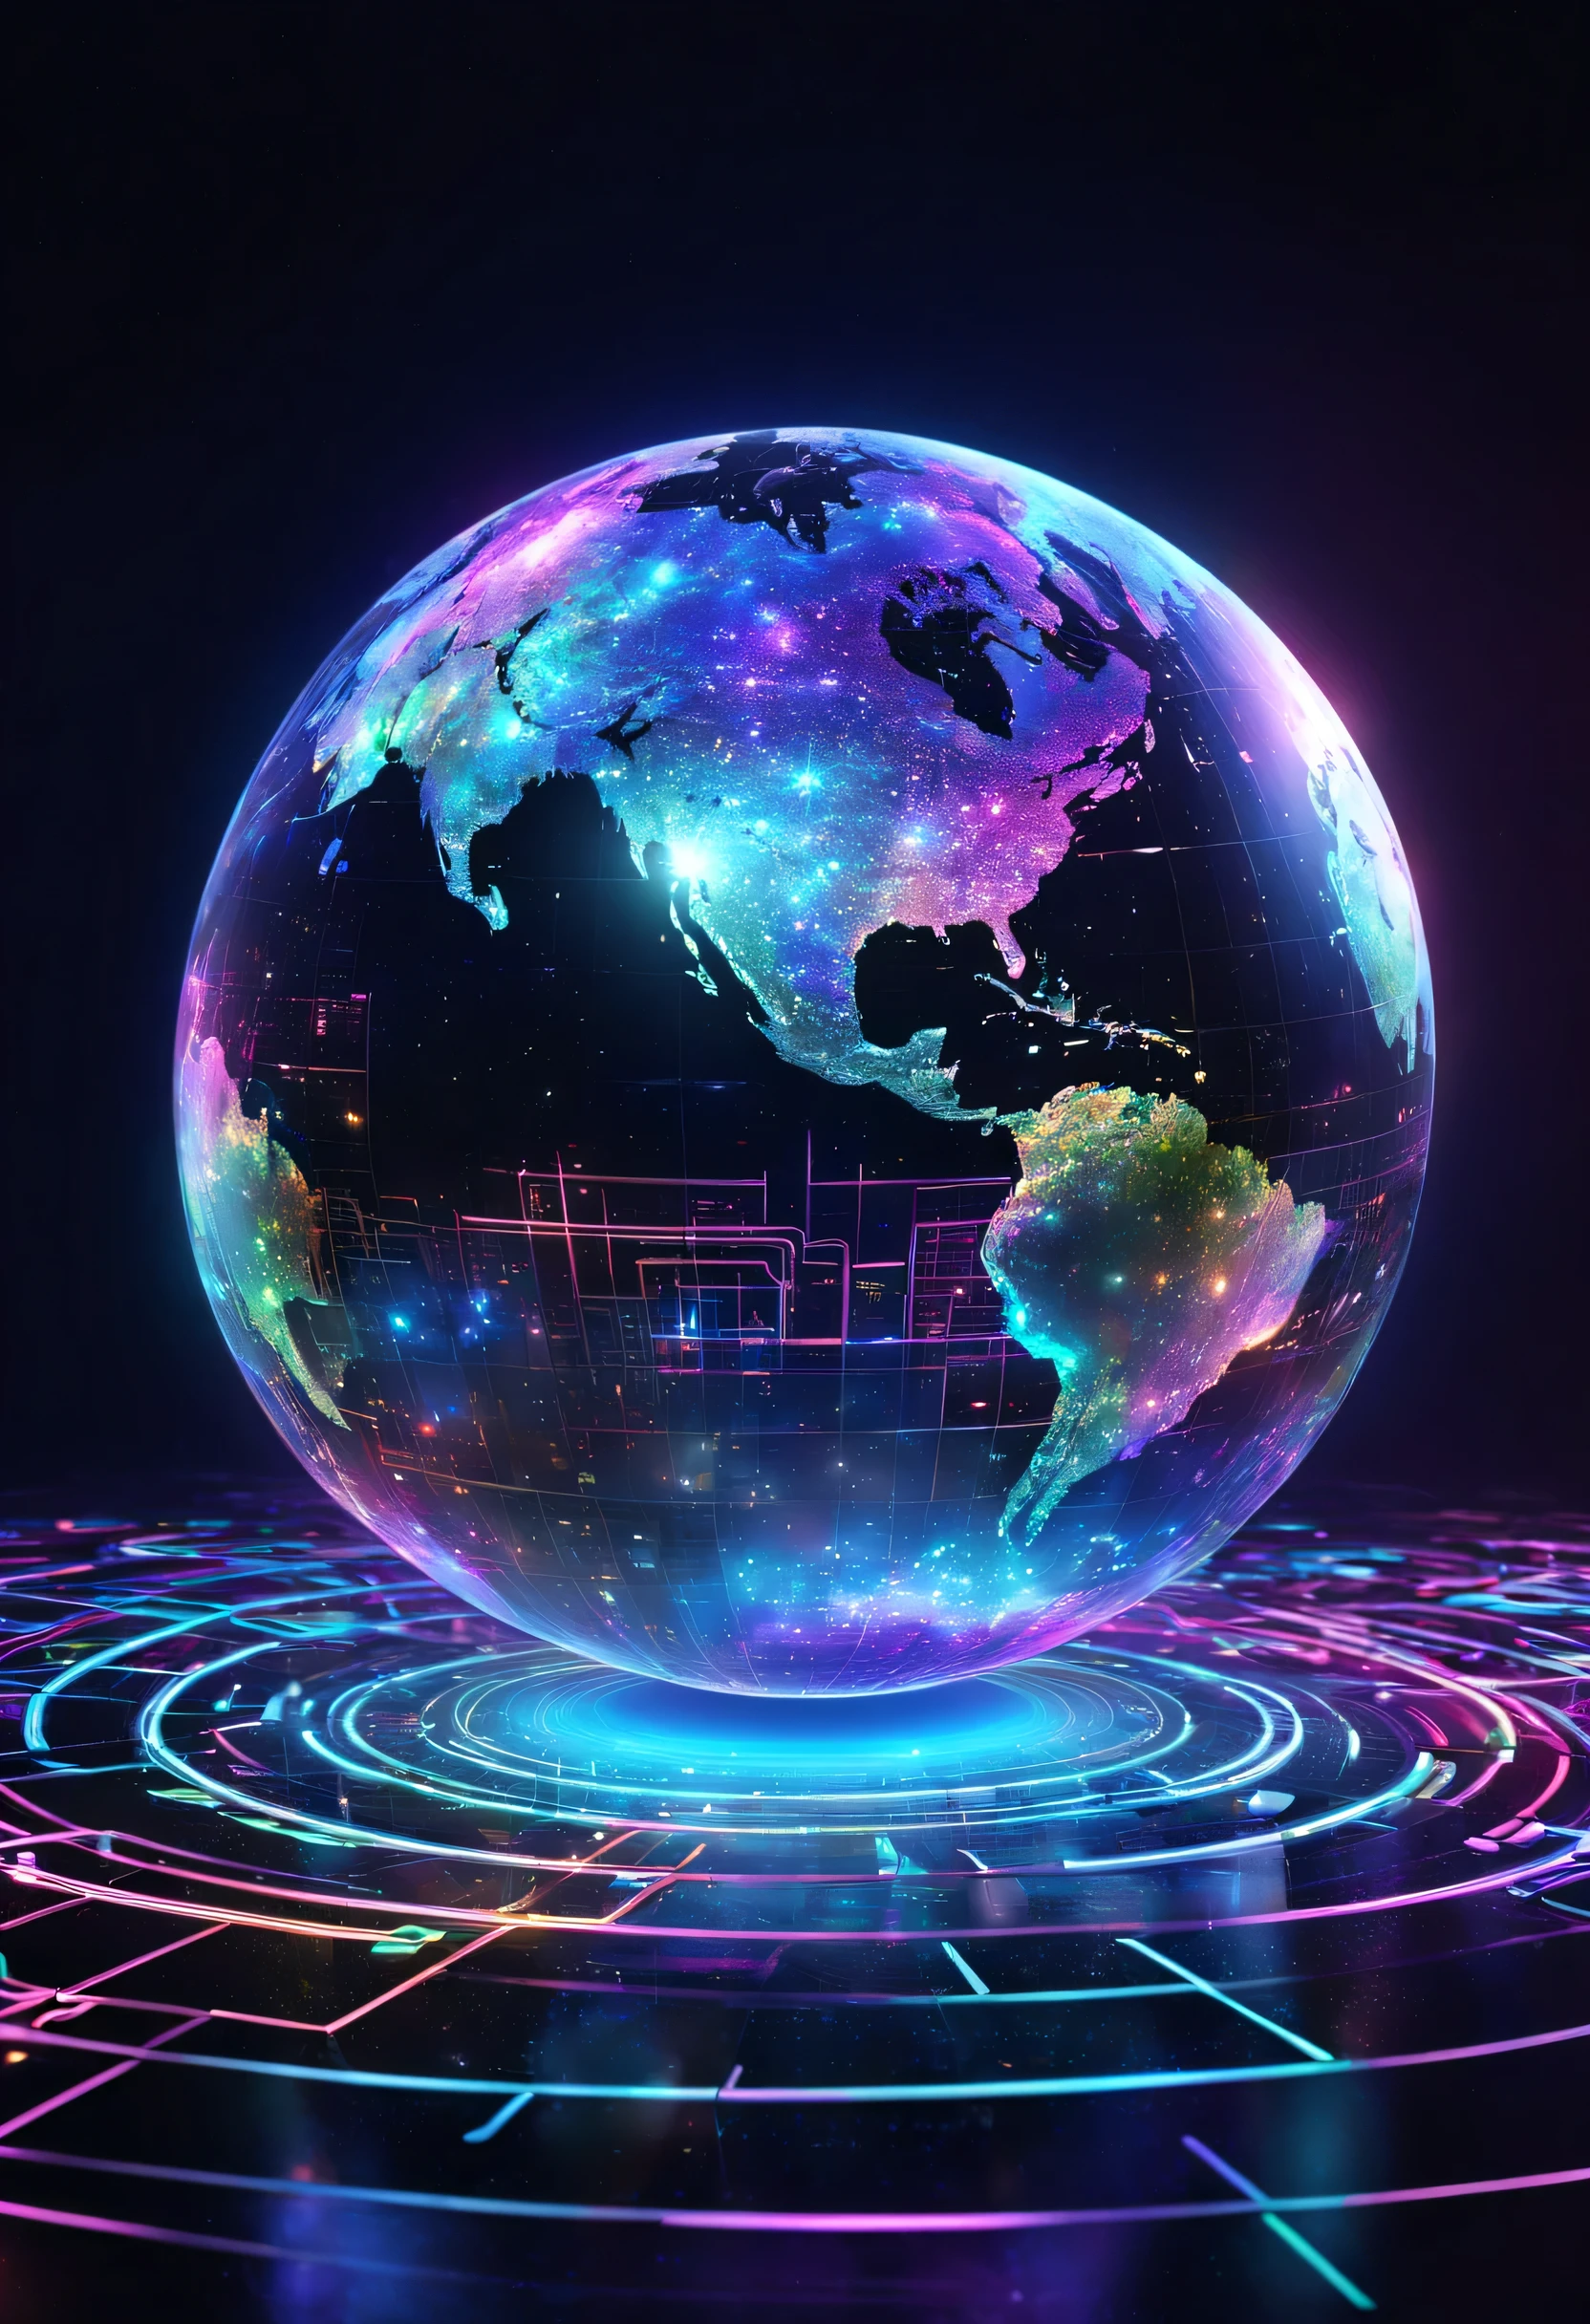 holography,draw in neon colors((Earth)):sphere:((floating)),transparent,Three-dimensional,light,SF,Digitalアート,Digital,scientific,dark background:electronic circuitry:draw in neon colors,3D,masterpiece,Digital空間,energy,beautiful,最高masterpiece,8K,科学のlight,be familiar with,Bright colors,colorful,nice,beautiful,rich colors,beautifullightのライン.magic effect,Sparkling,beautifullightの粒